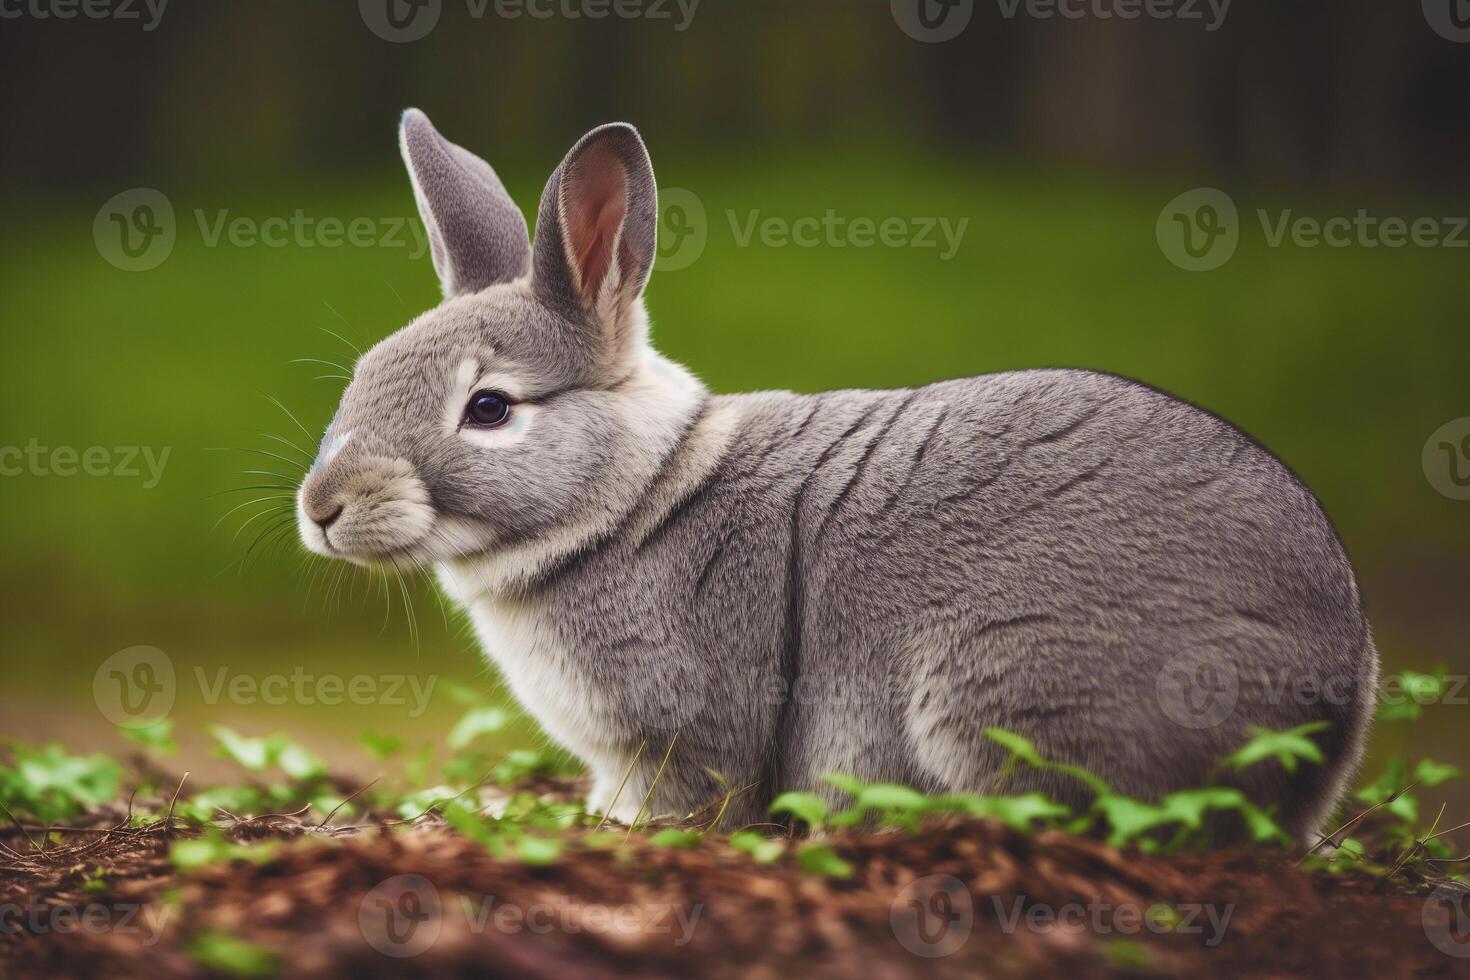 Rabbit in the forest at sunset. Animal in nature. Easter bunny. Wildlife scene. photo